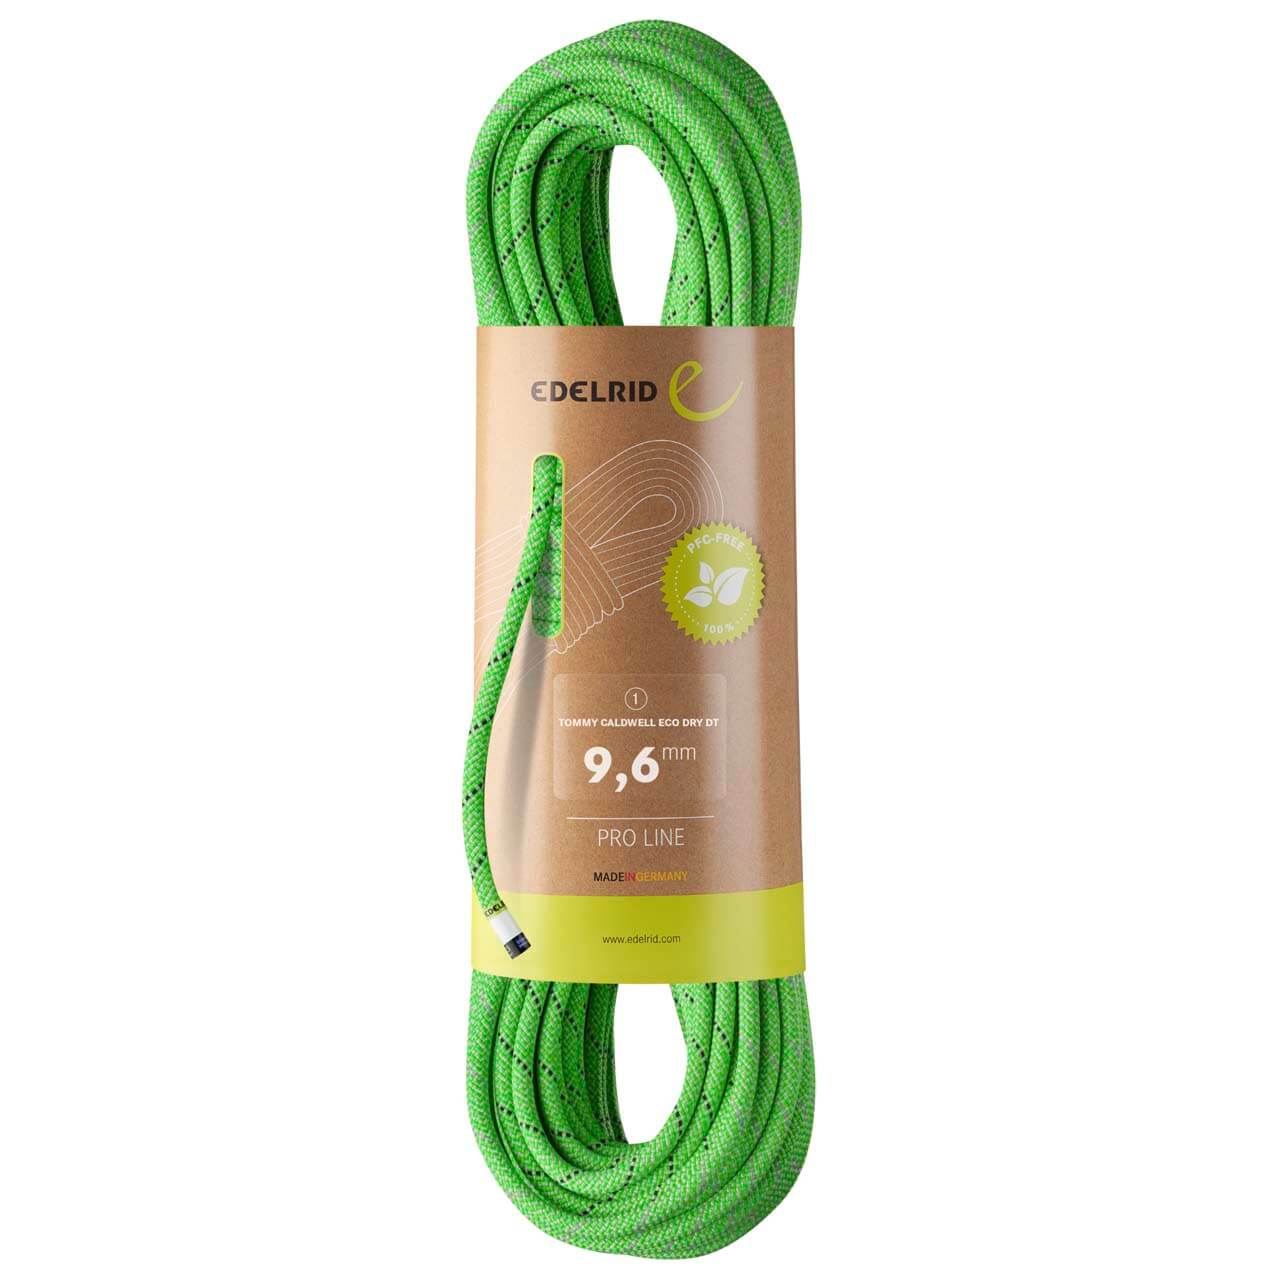 Edelrid Tommy Caldwell Eco Dry DT